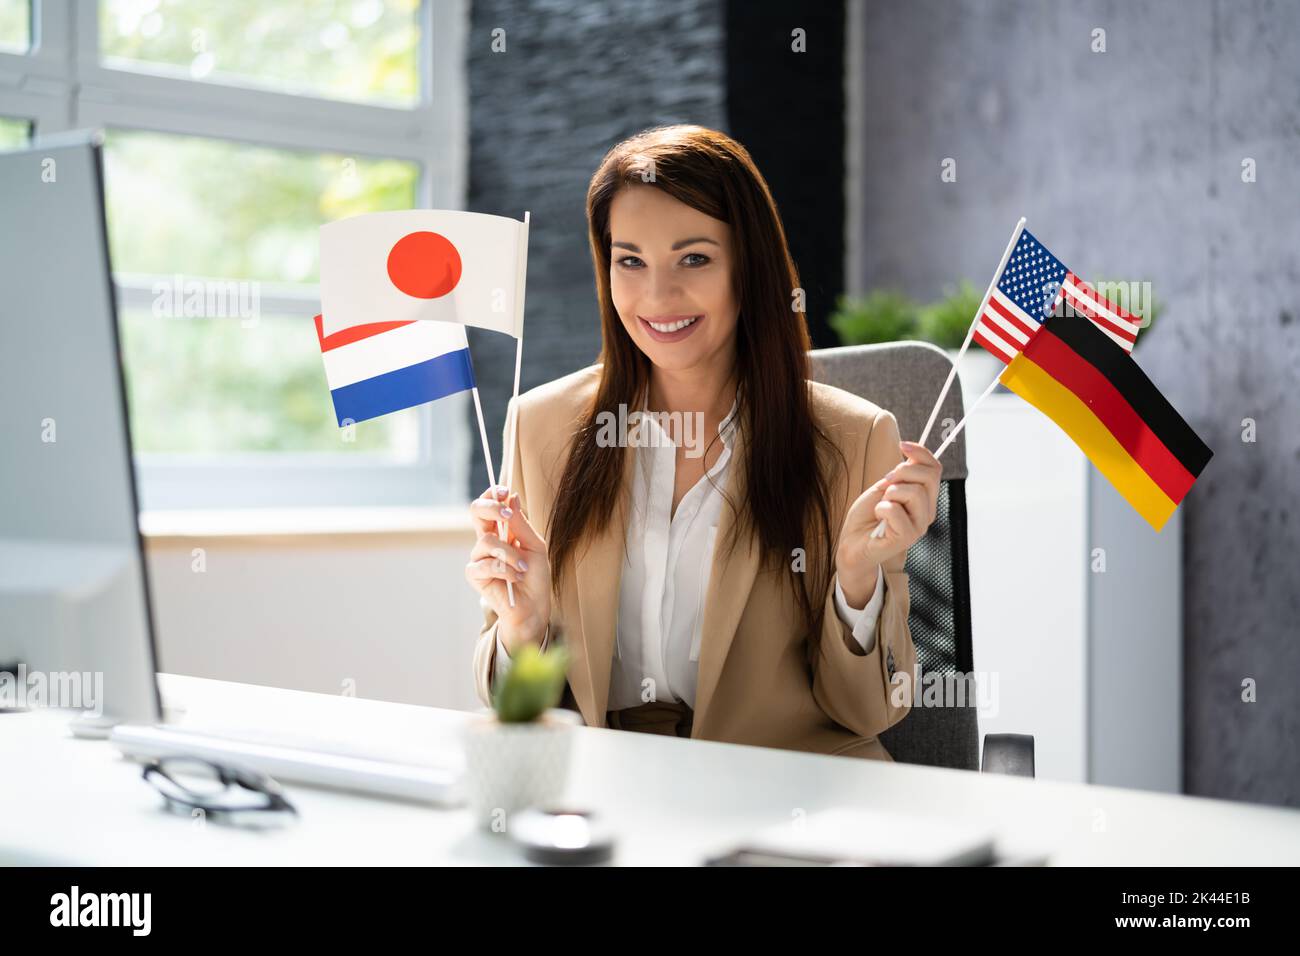 Foreign Language Learning Course. Young Happy Lady Studying Stock Photo